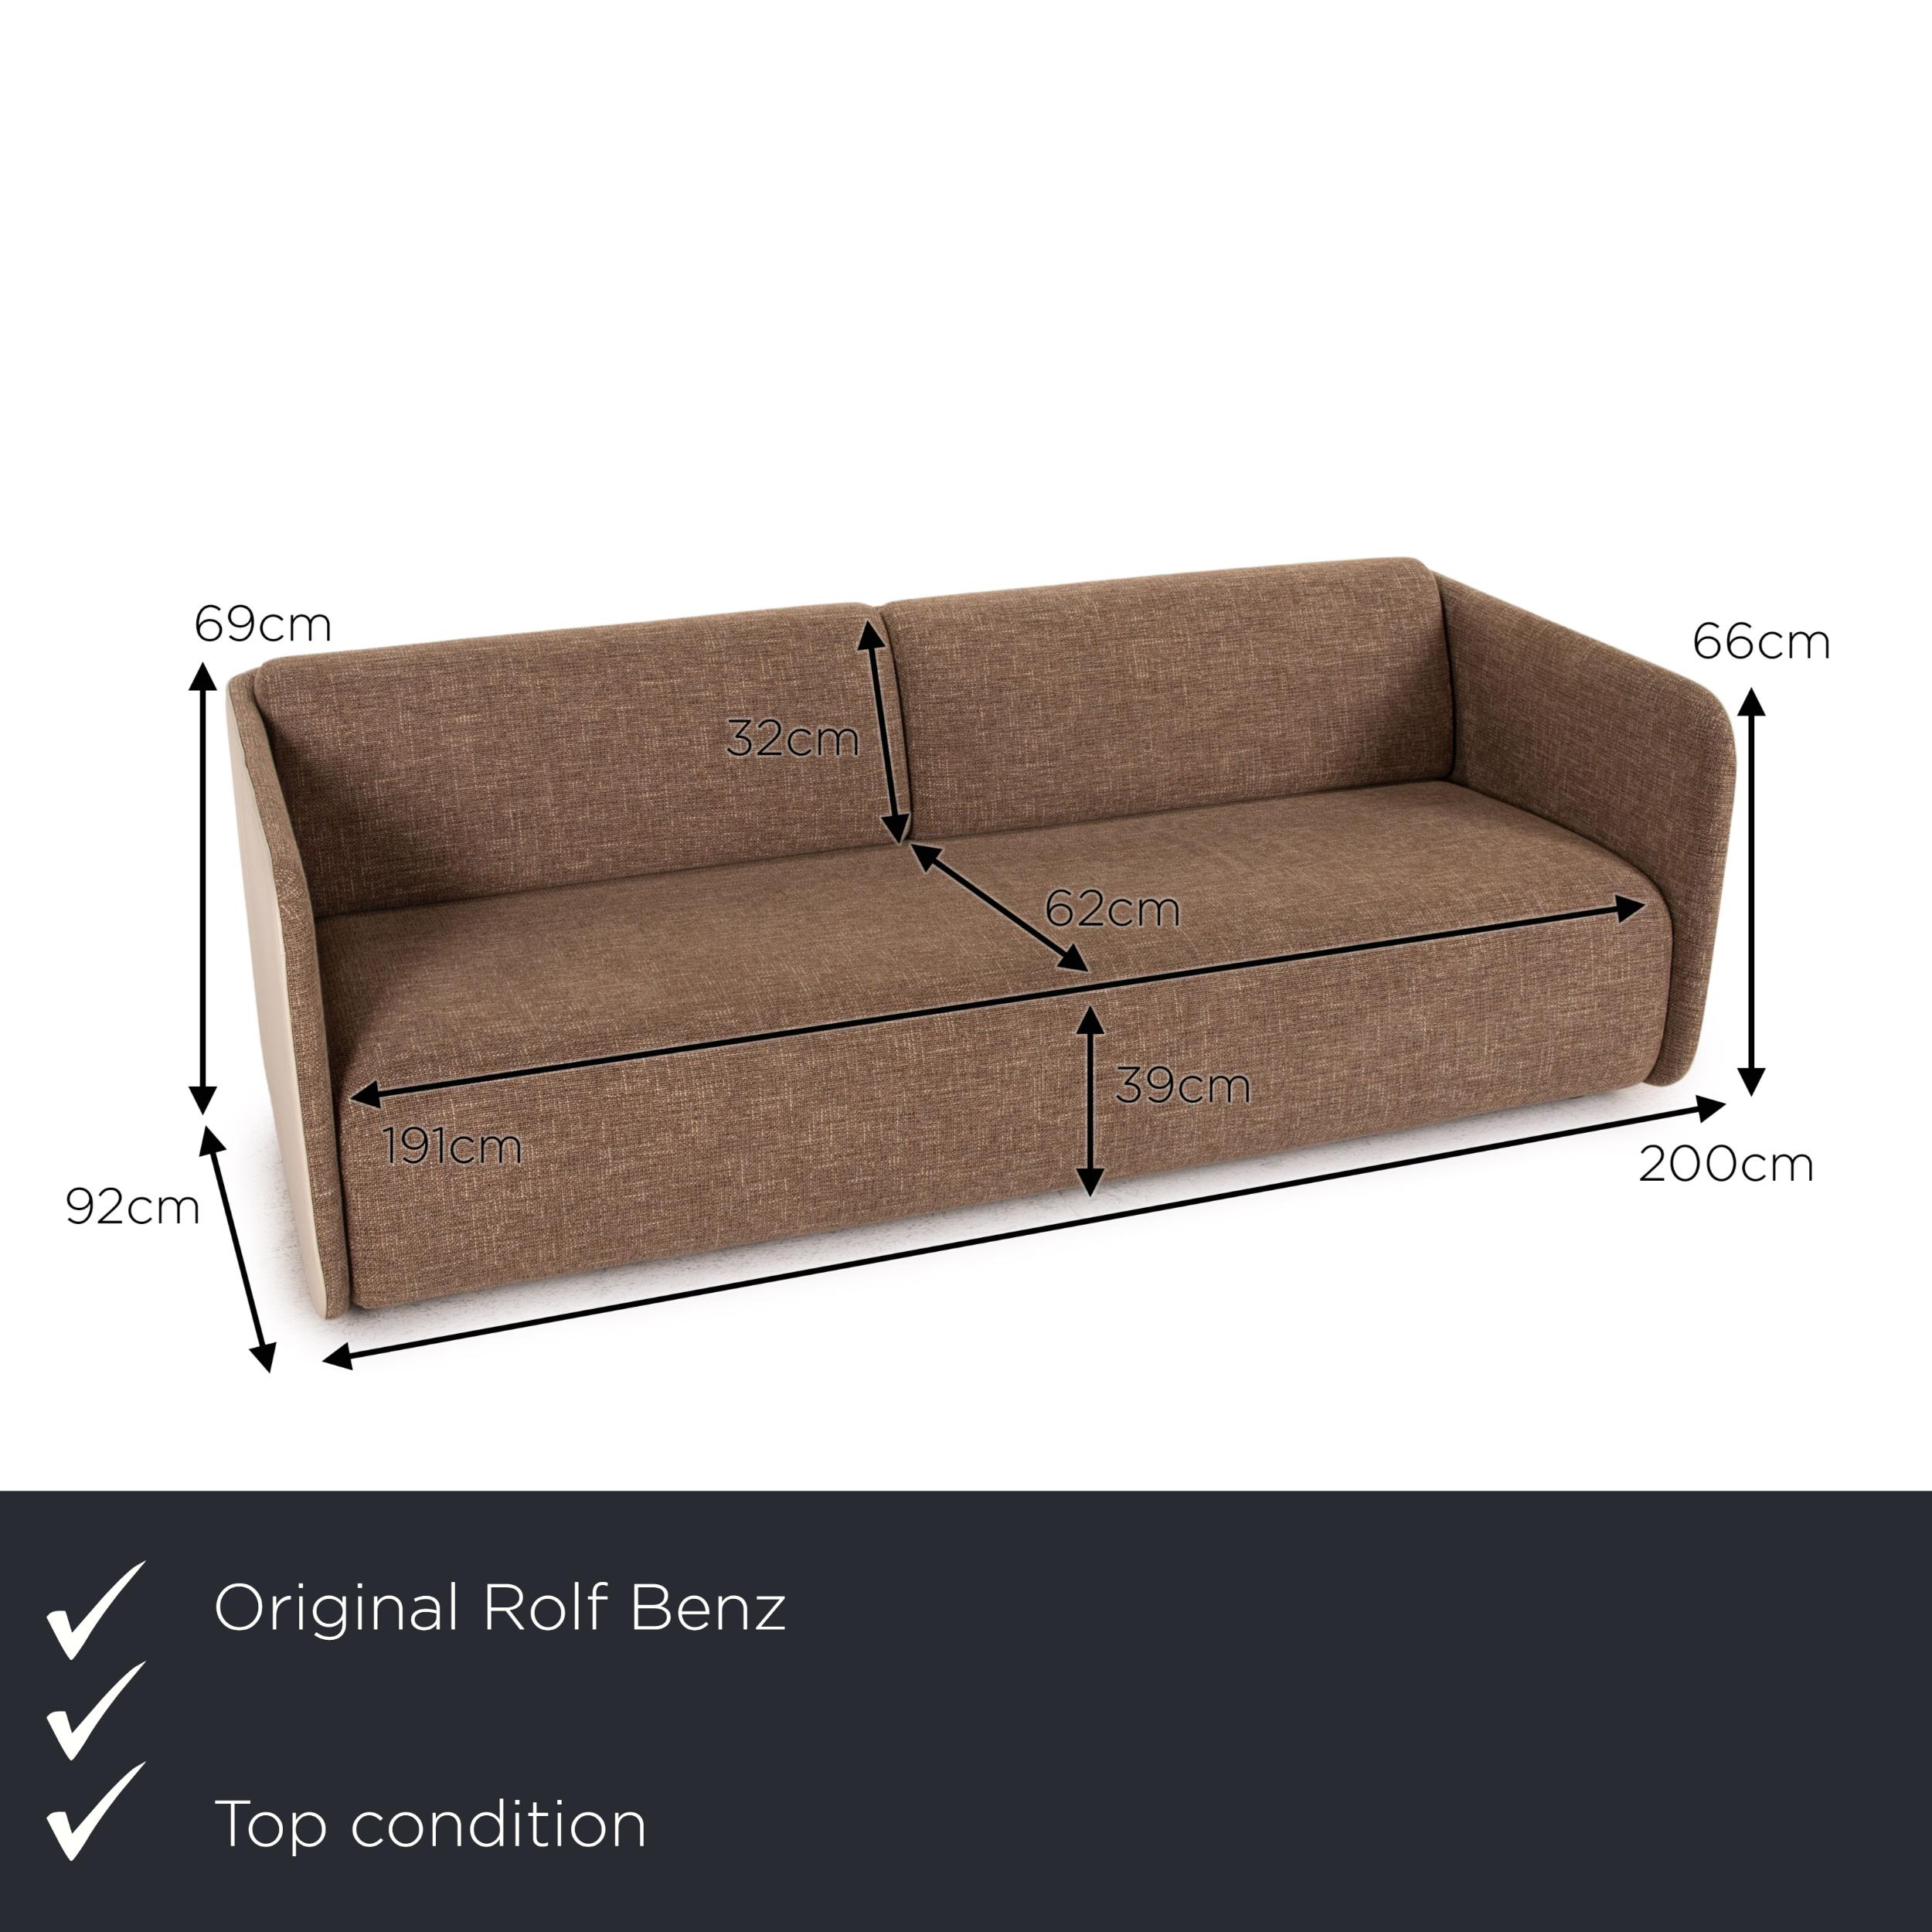 We present to you a Rolf Benz 6900 fabric leather three-seater cream brown sofa couch.

 

 Product measurements in centimeters:
 

 depth: 92
 width: 200
 height: 69
 seat height: 39
 rest height: 66
 seat depth: 62
 seat width: 191
